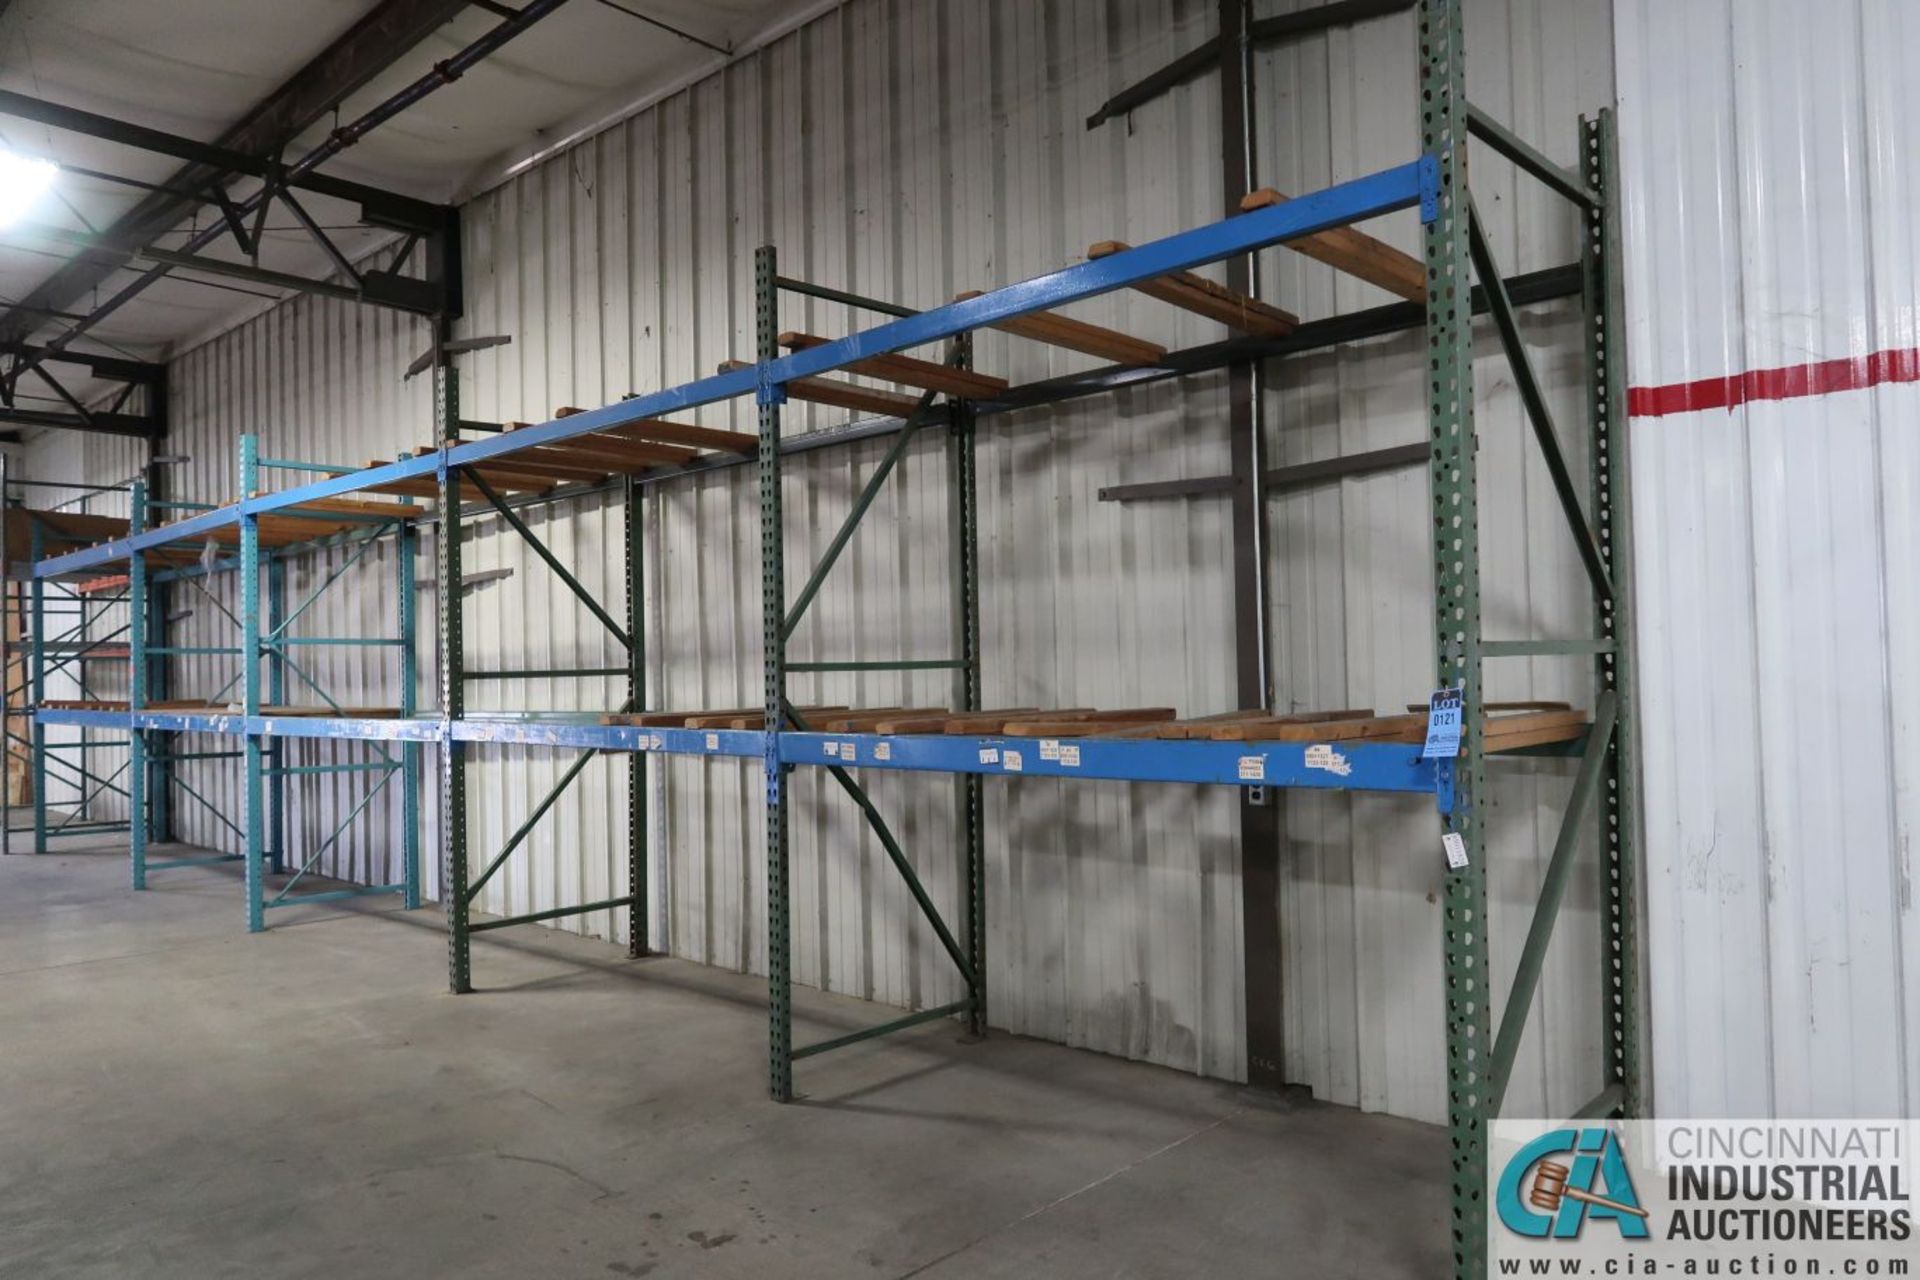 Sections Pallet Rack; (6) 44" x 10' Uprights, (16) 8' Beams, (4) 10' Beams